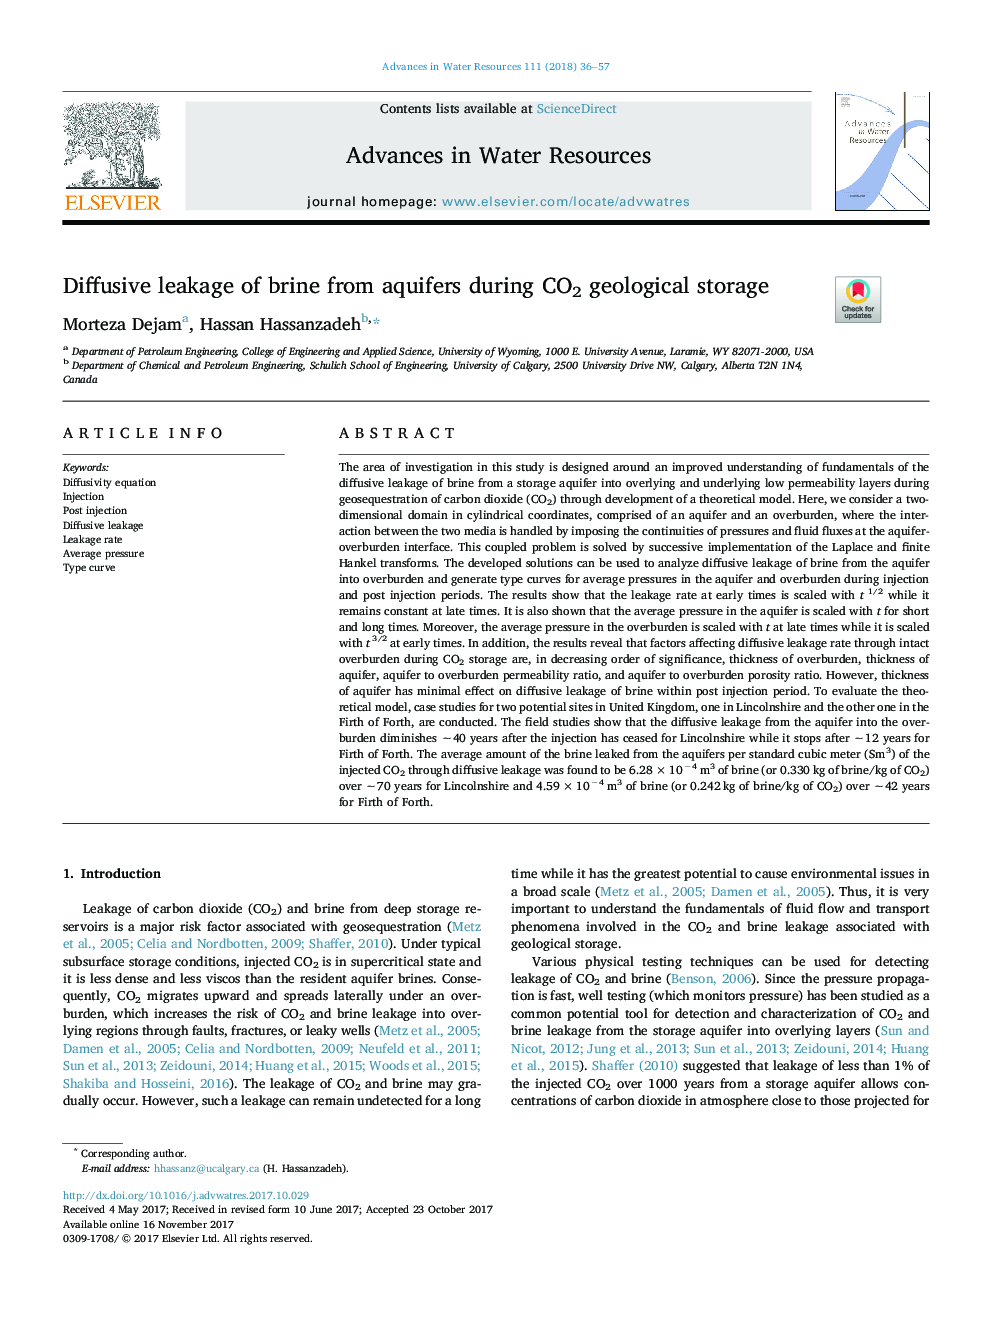 Diffusive leakage of brine from aquifers during CO2 geological storage